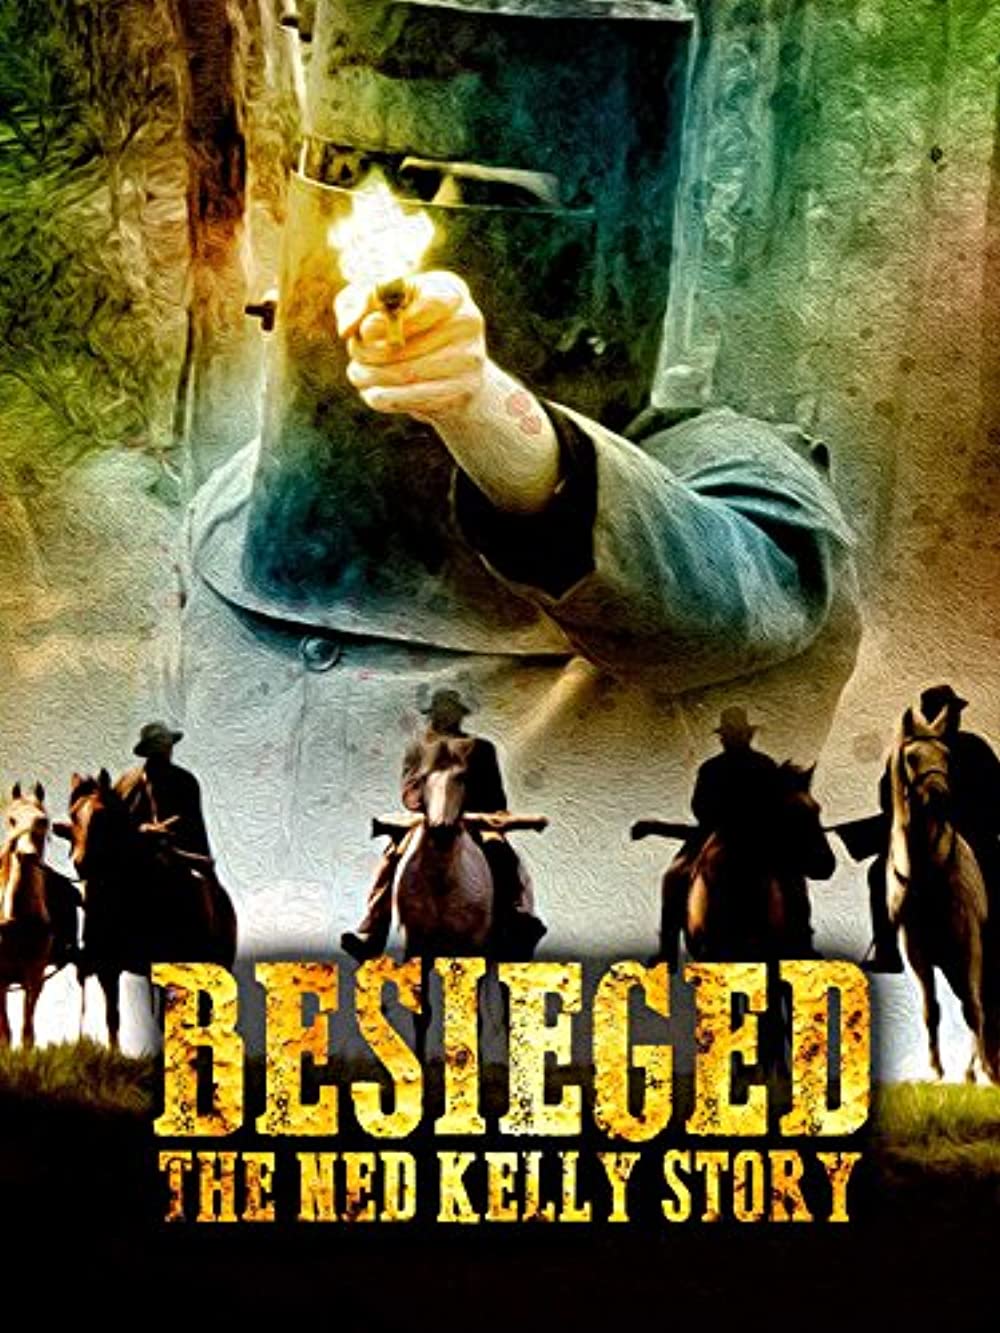 Download Besieged: The Ned Kelly Story Movie | Besieged: The Ned Kelly Story